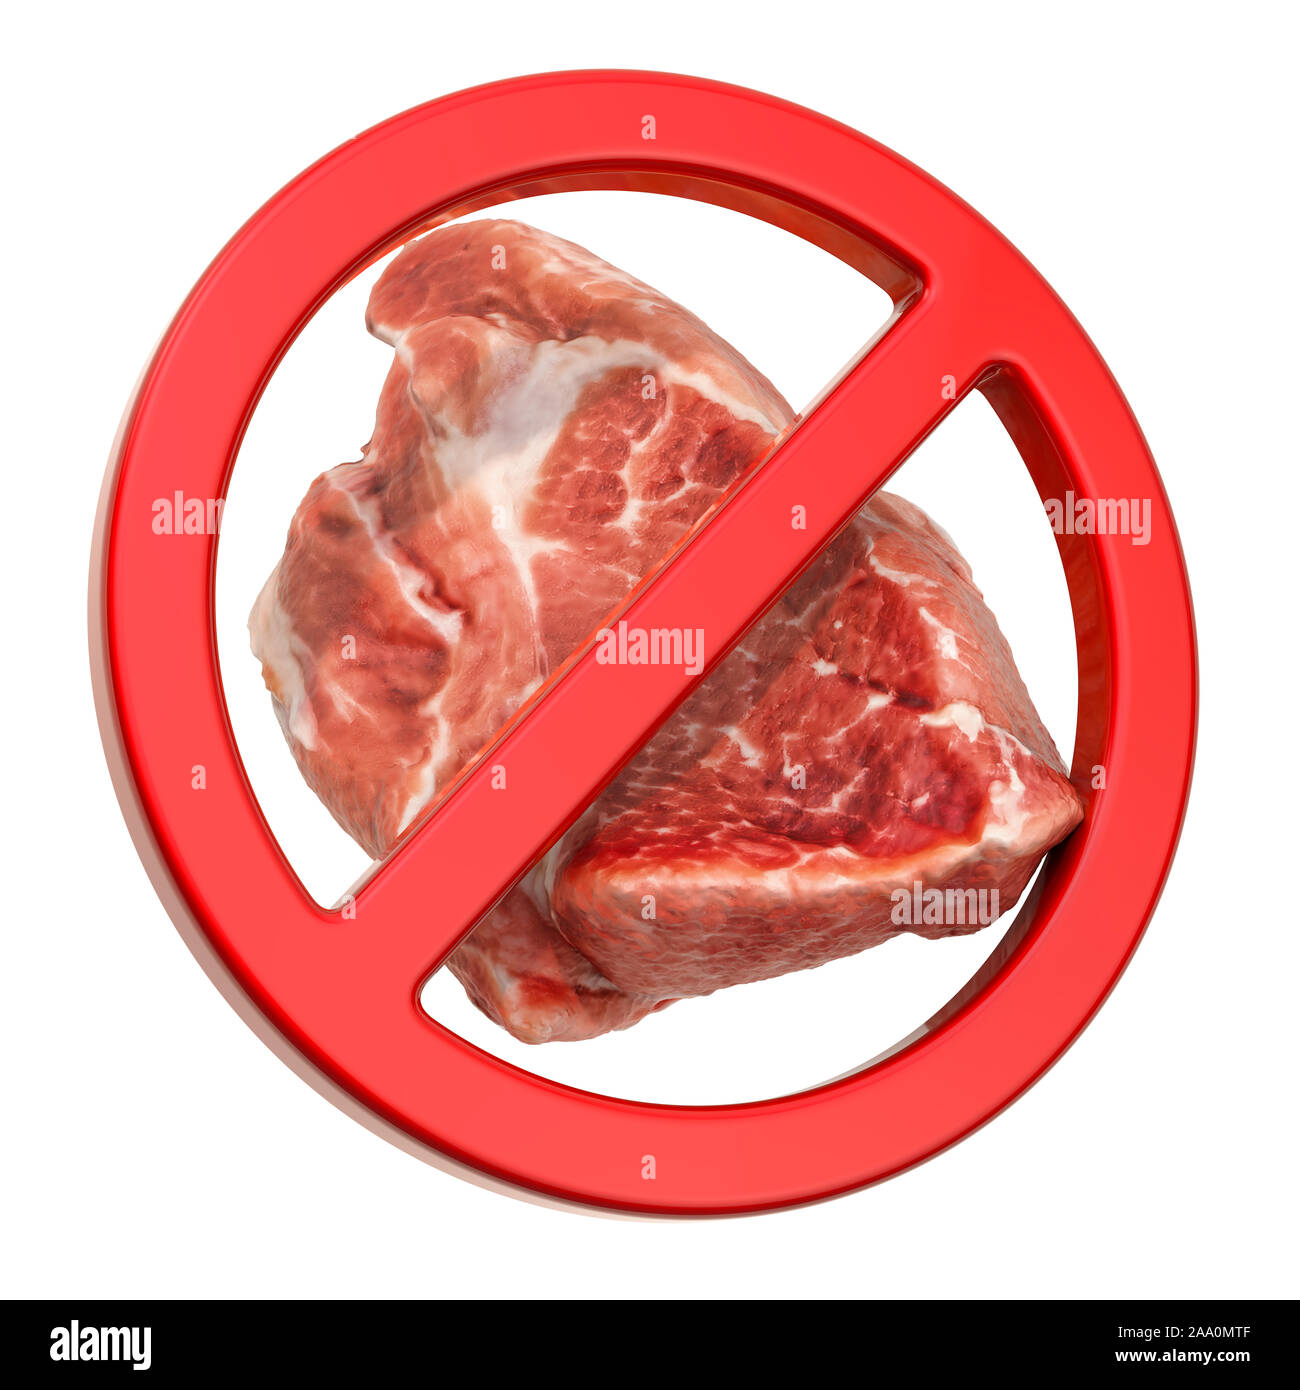 No Meat. Forbidden sign with meat, 3D rendering isolated on white background Stock Photo